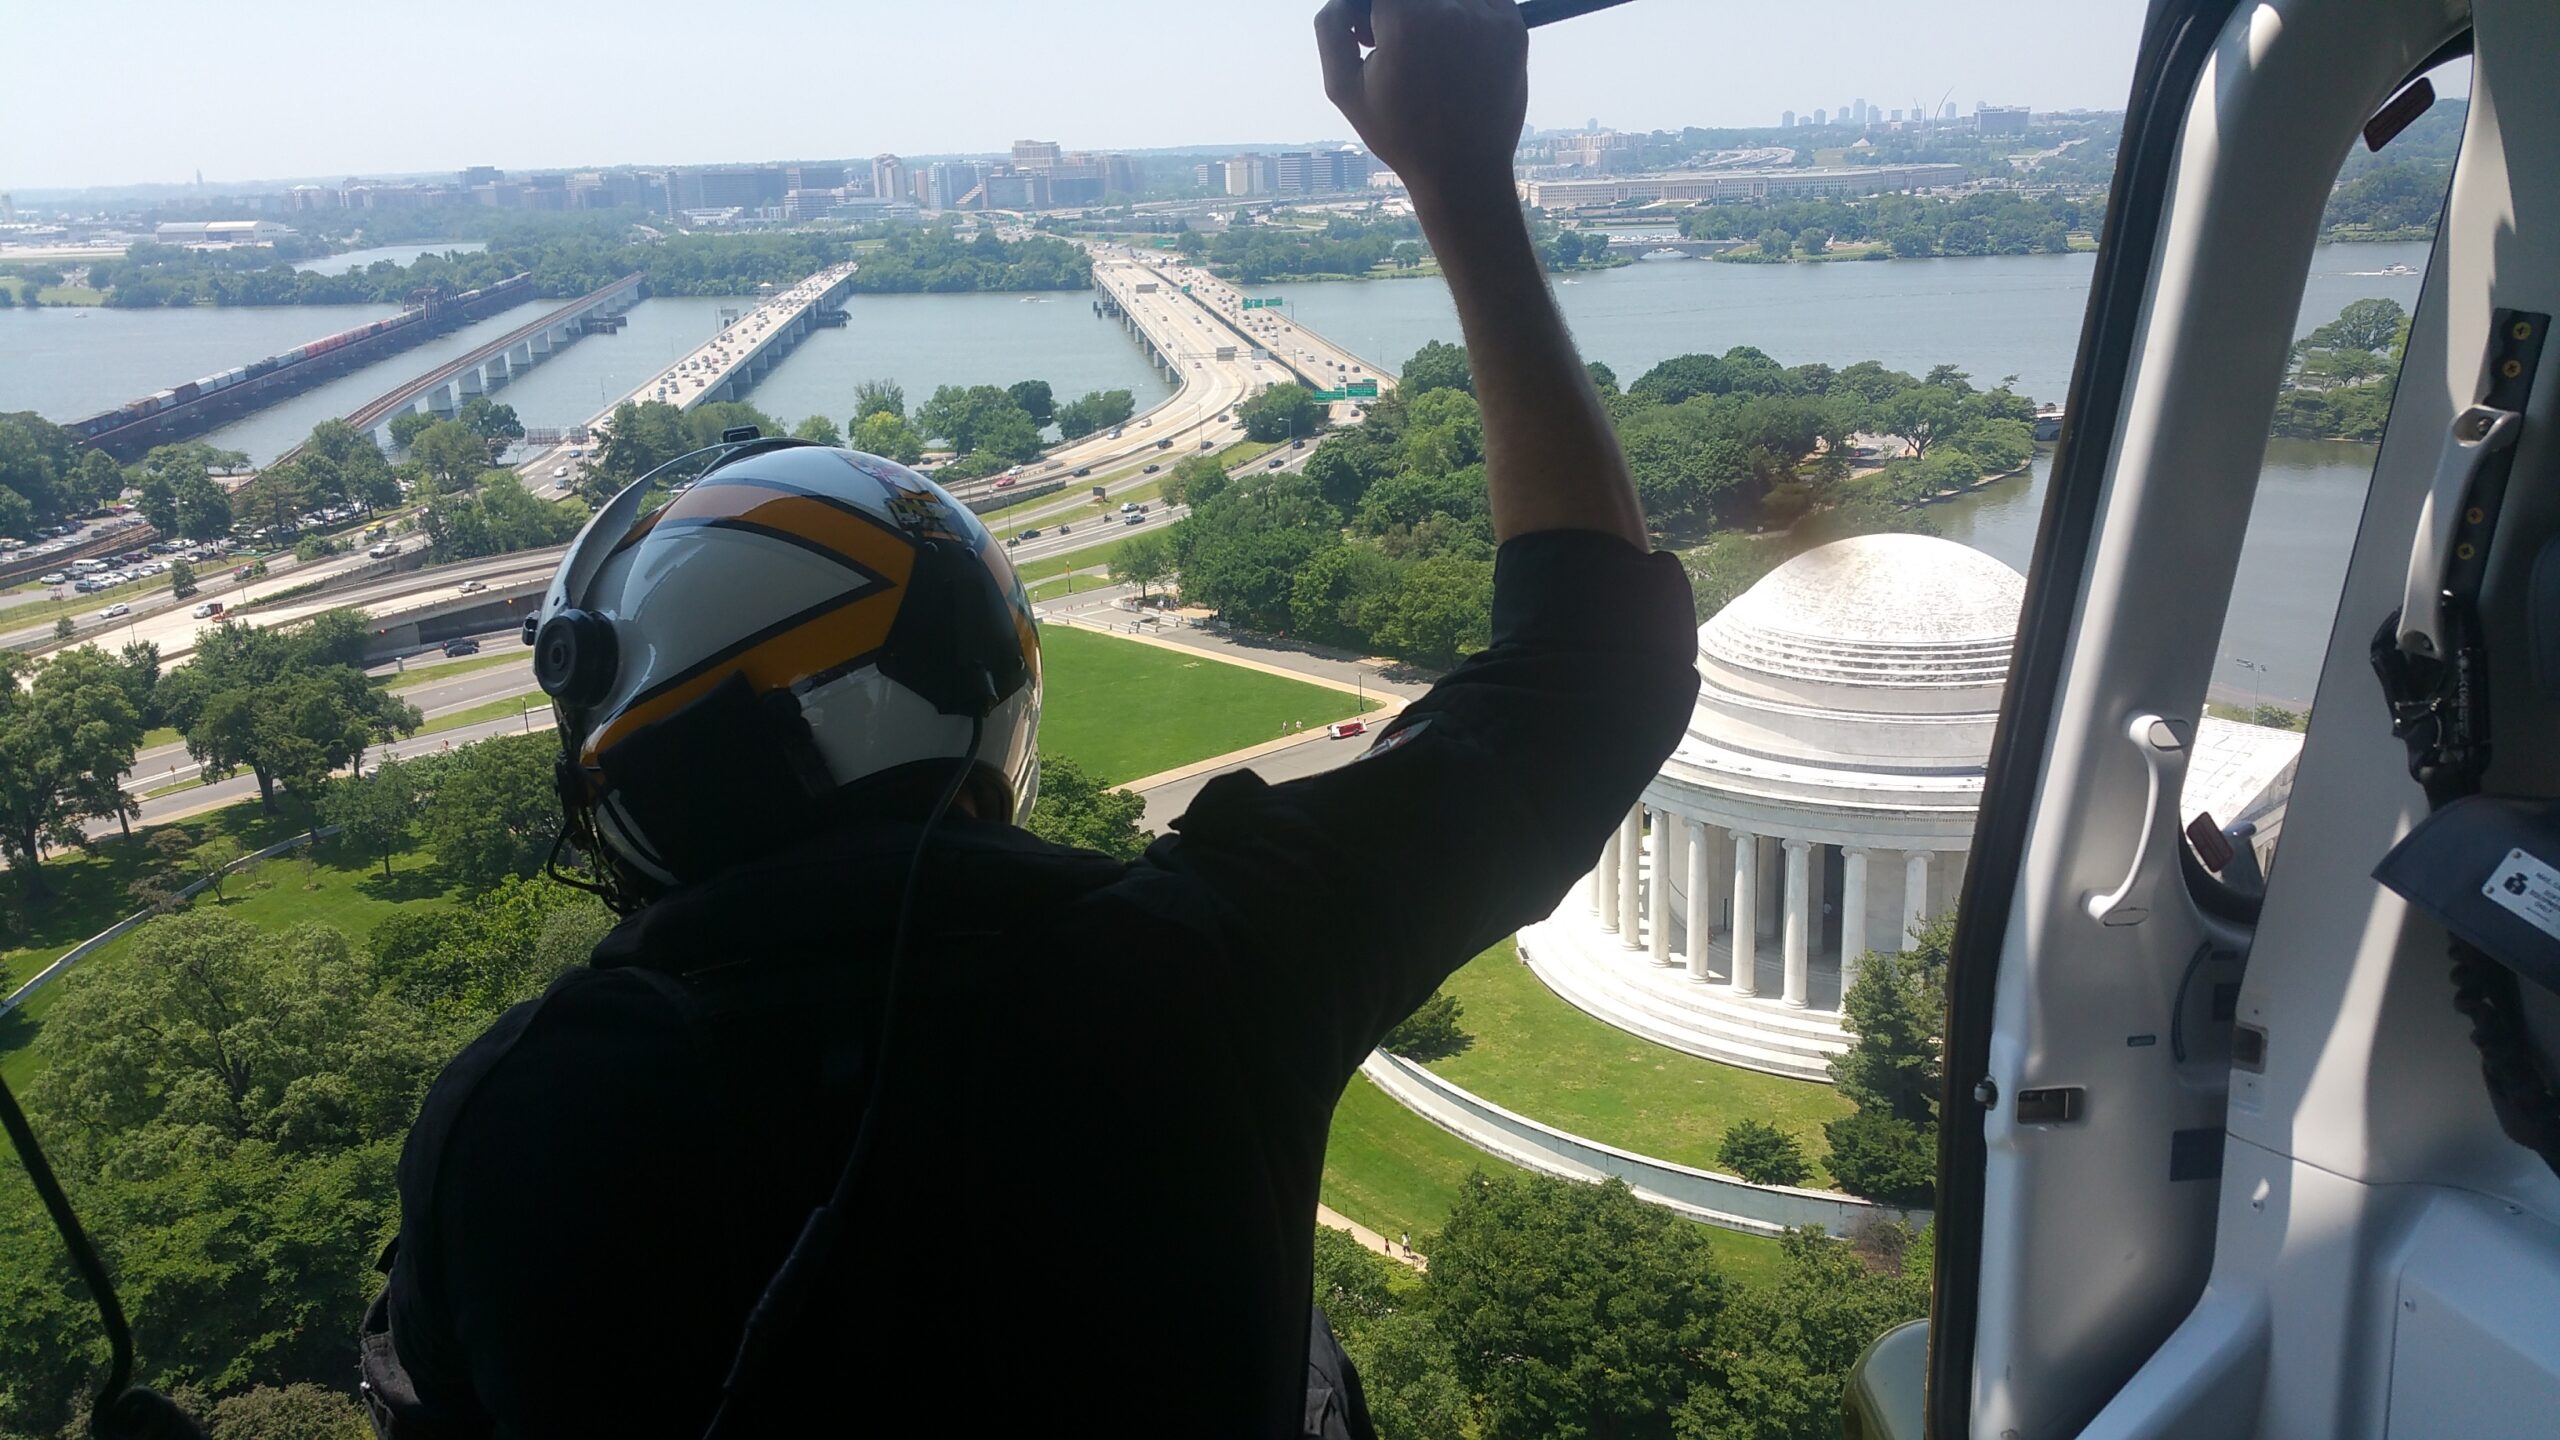 Ed Strapp, ATC Ed Strapp hangs on as he flies over Washington, DC in a helicopter